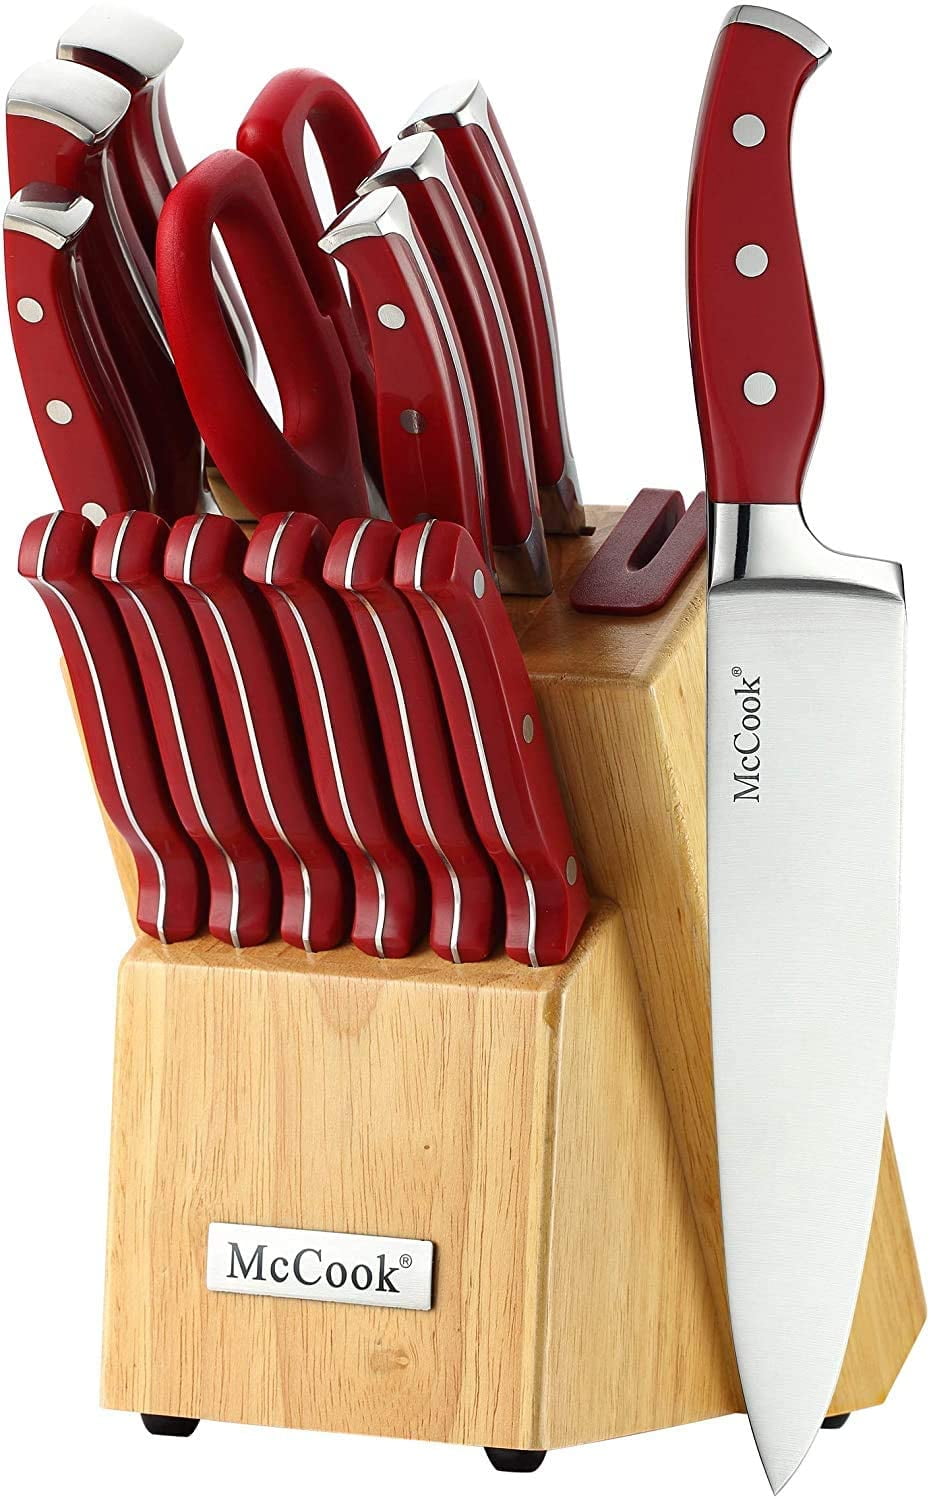 McCook MC69W Kitchen Knife Sets,20 Pieces German Stainless Steel Knives  Block Set with Built-in Sharpener 